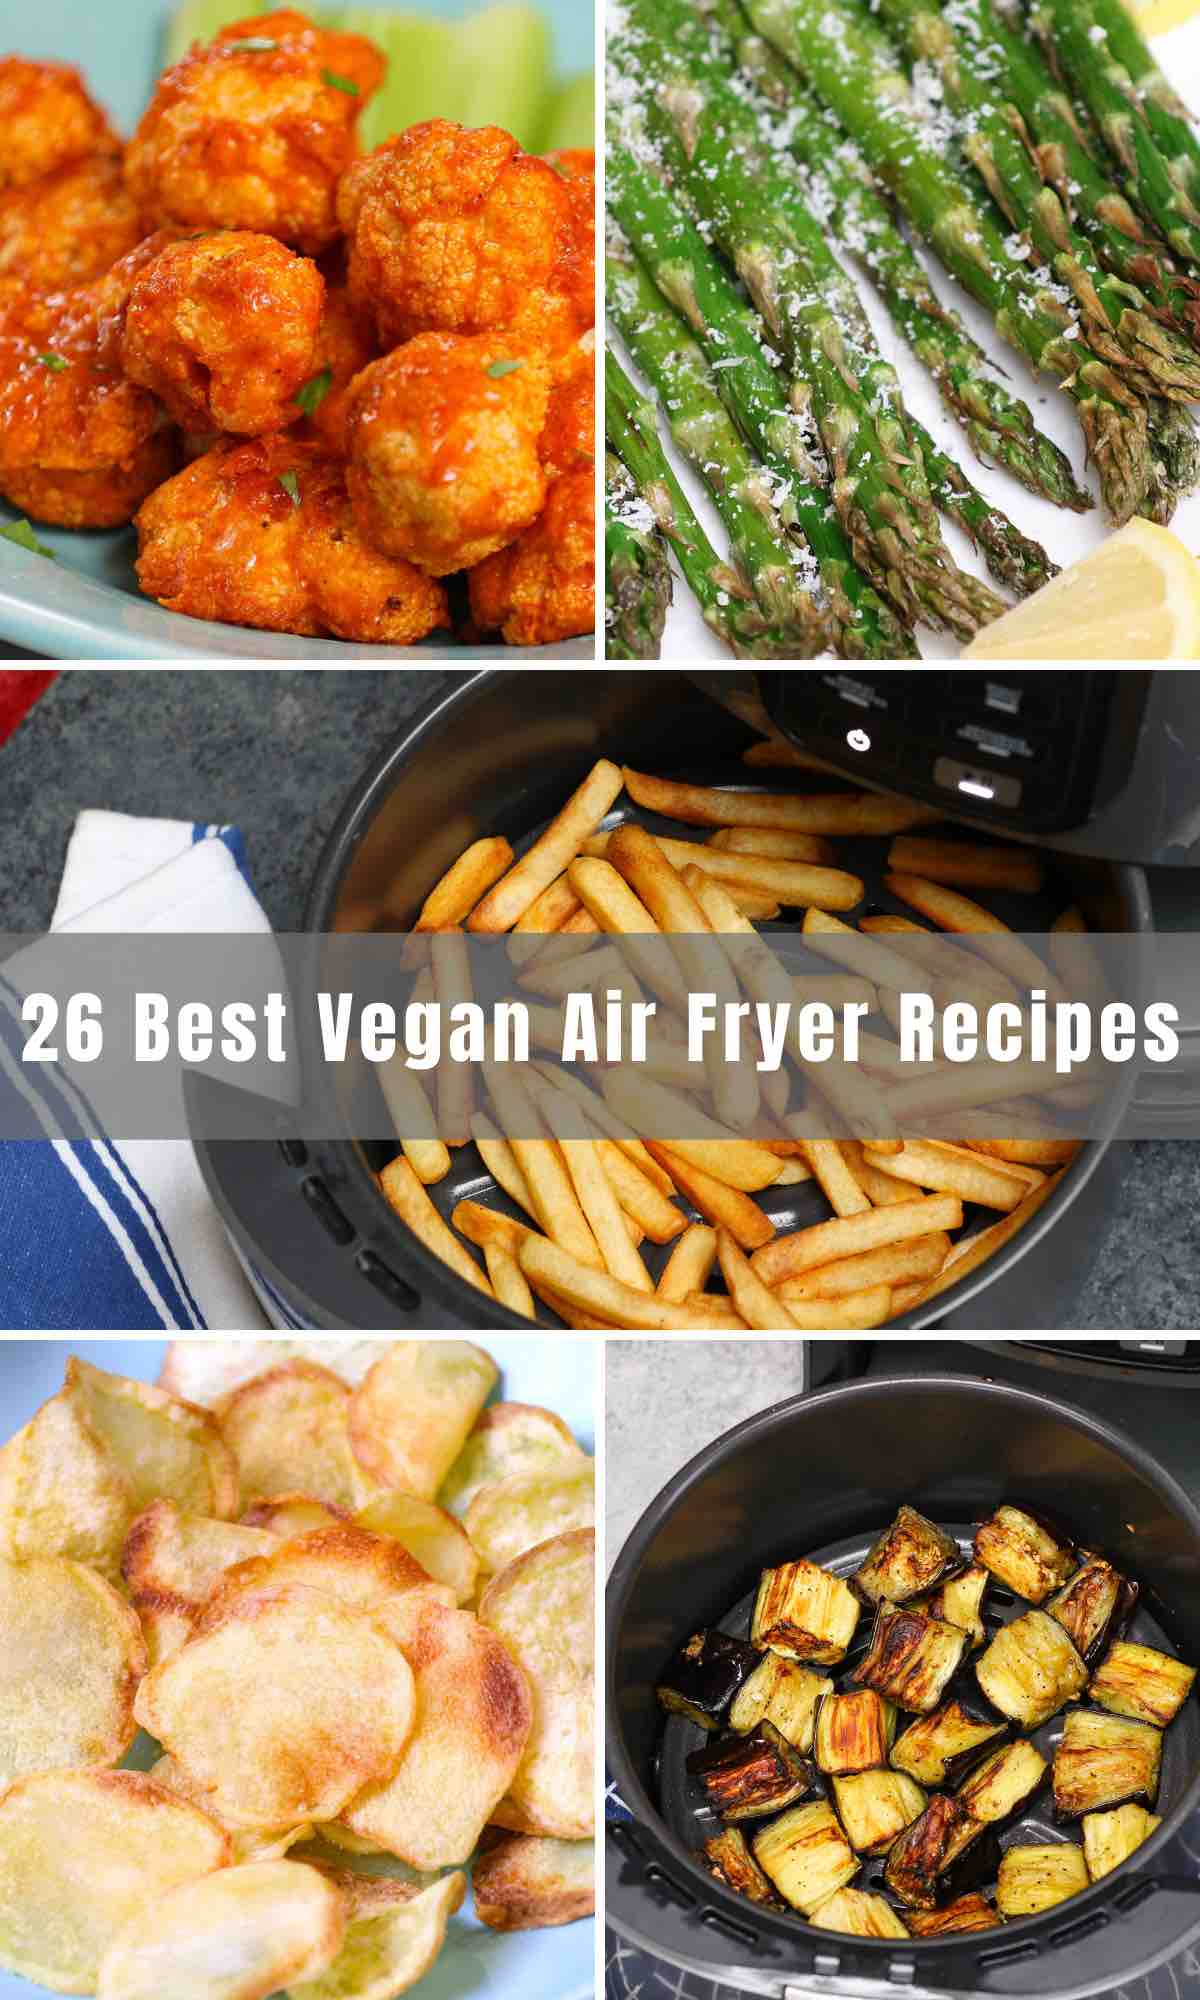 Are you looking for a healthier way to cook some of your favorite dishes without the added fat or oil? Well, you've come to the right place! We've collected 26 of the Best Vegan Air Fryer Recipes. Many of them are as crispy as the deep-fried version but you can now enjoy them guilt-free.